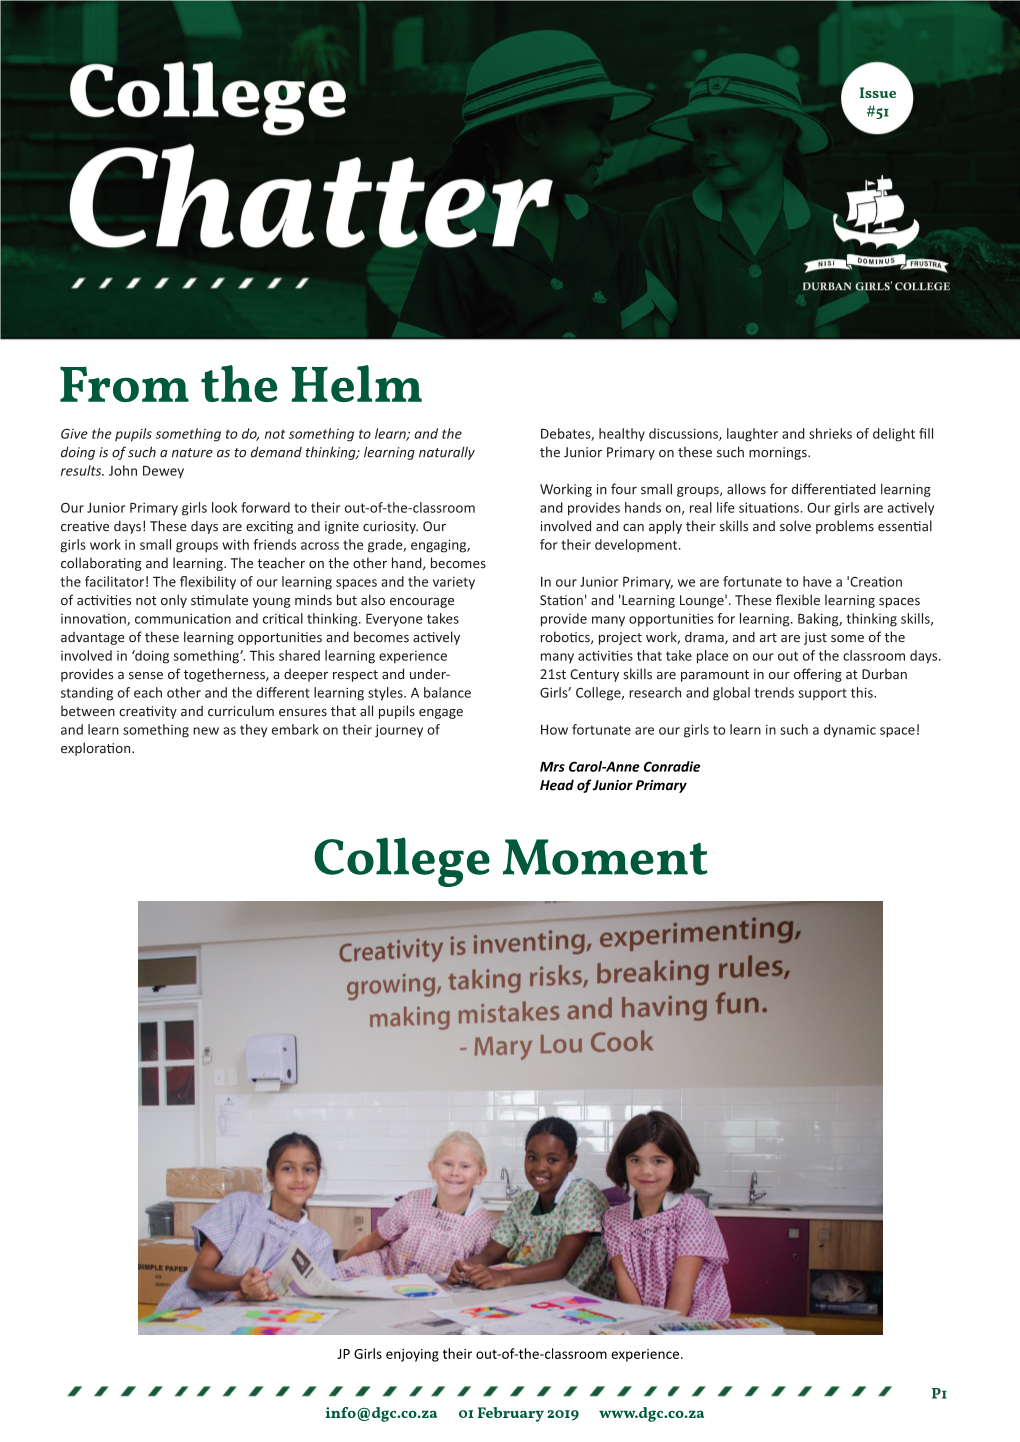 College Chatter Official Issue #51.Indd